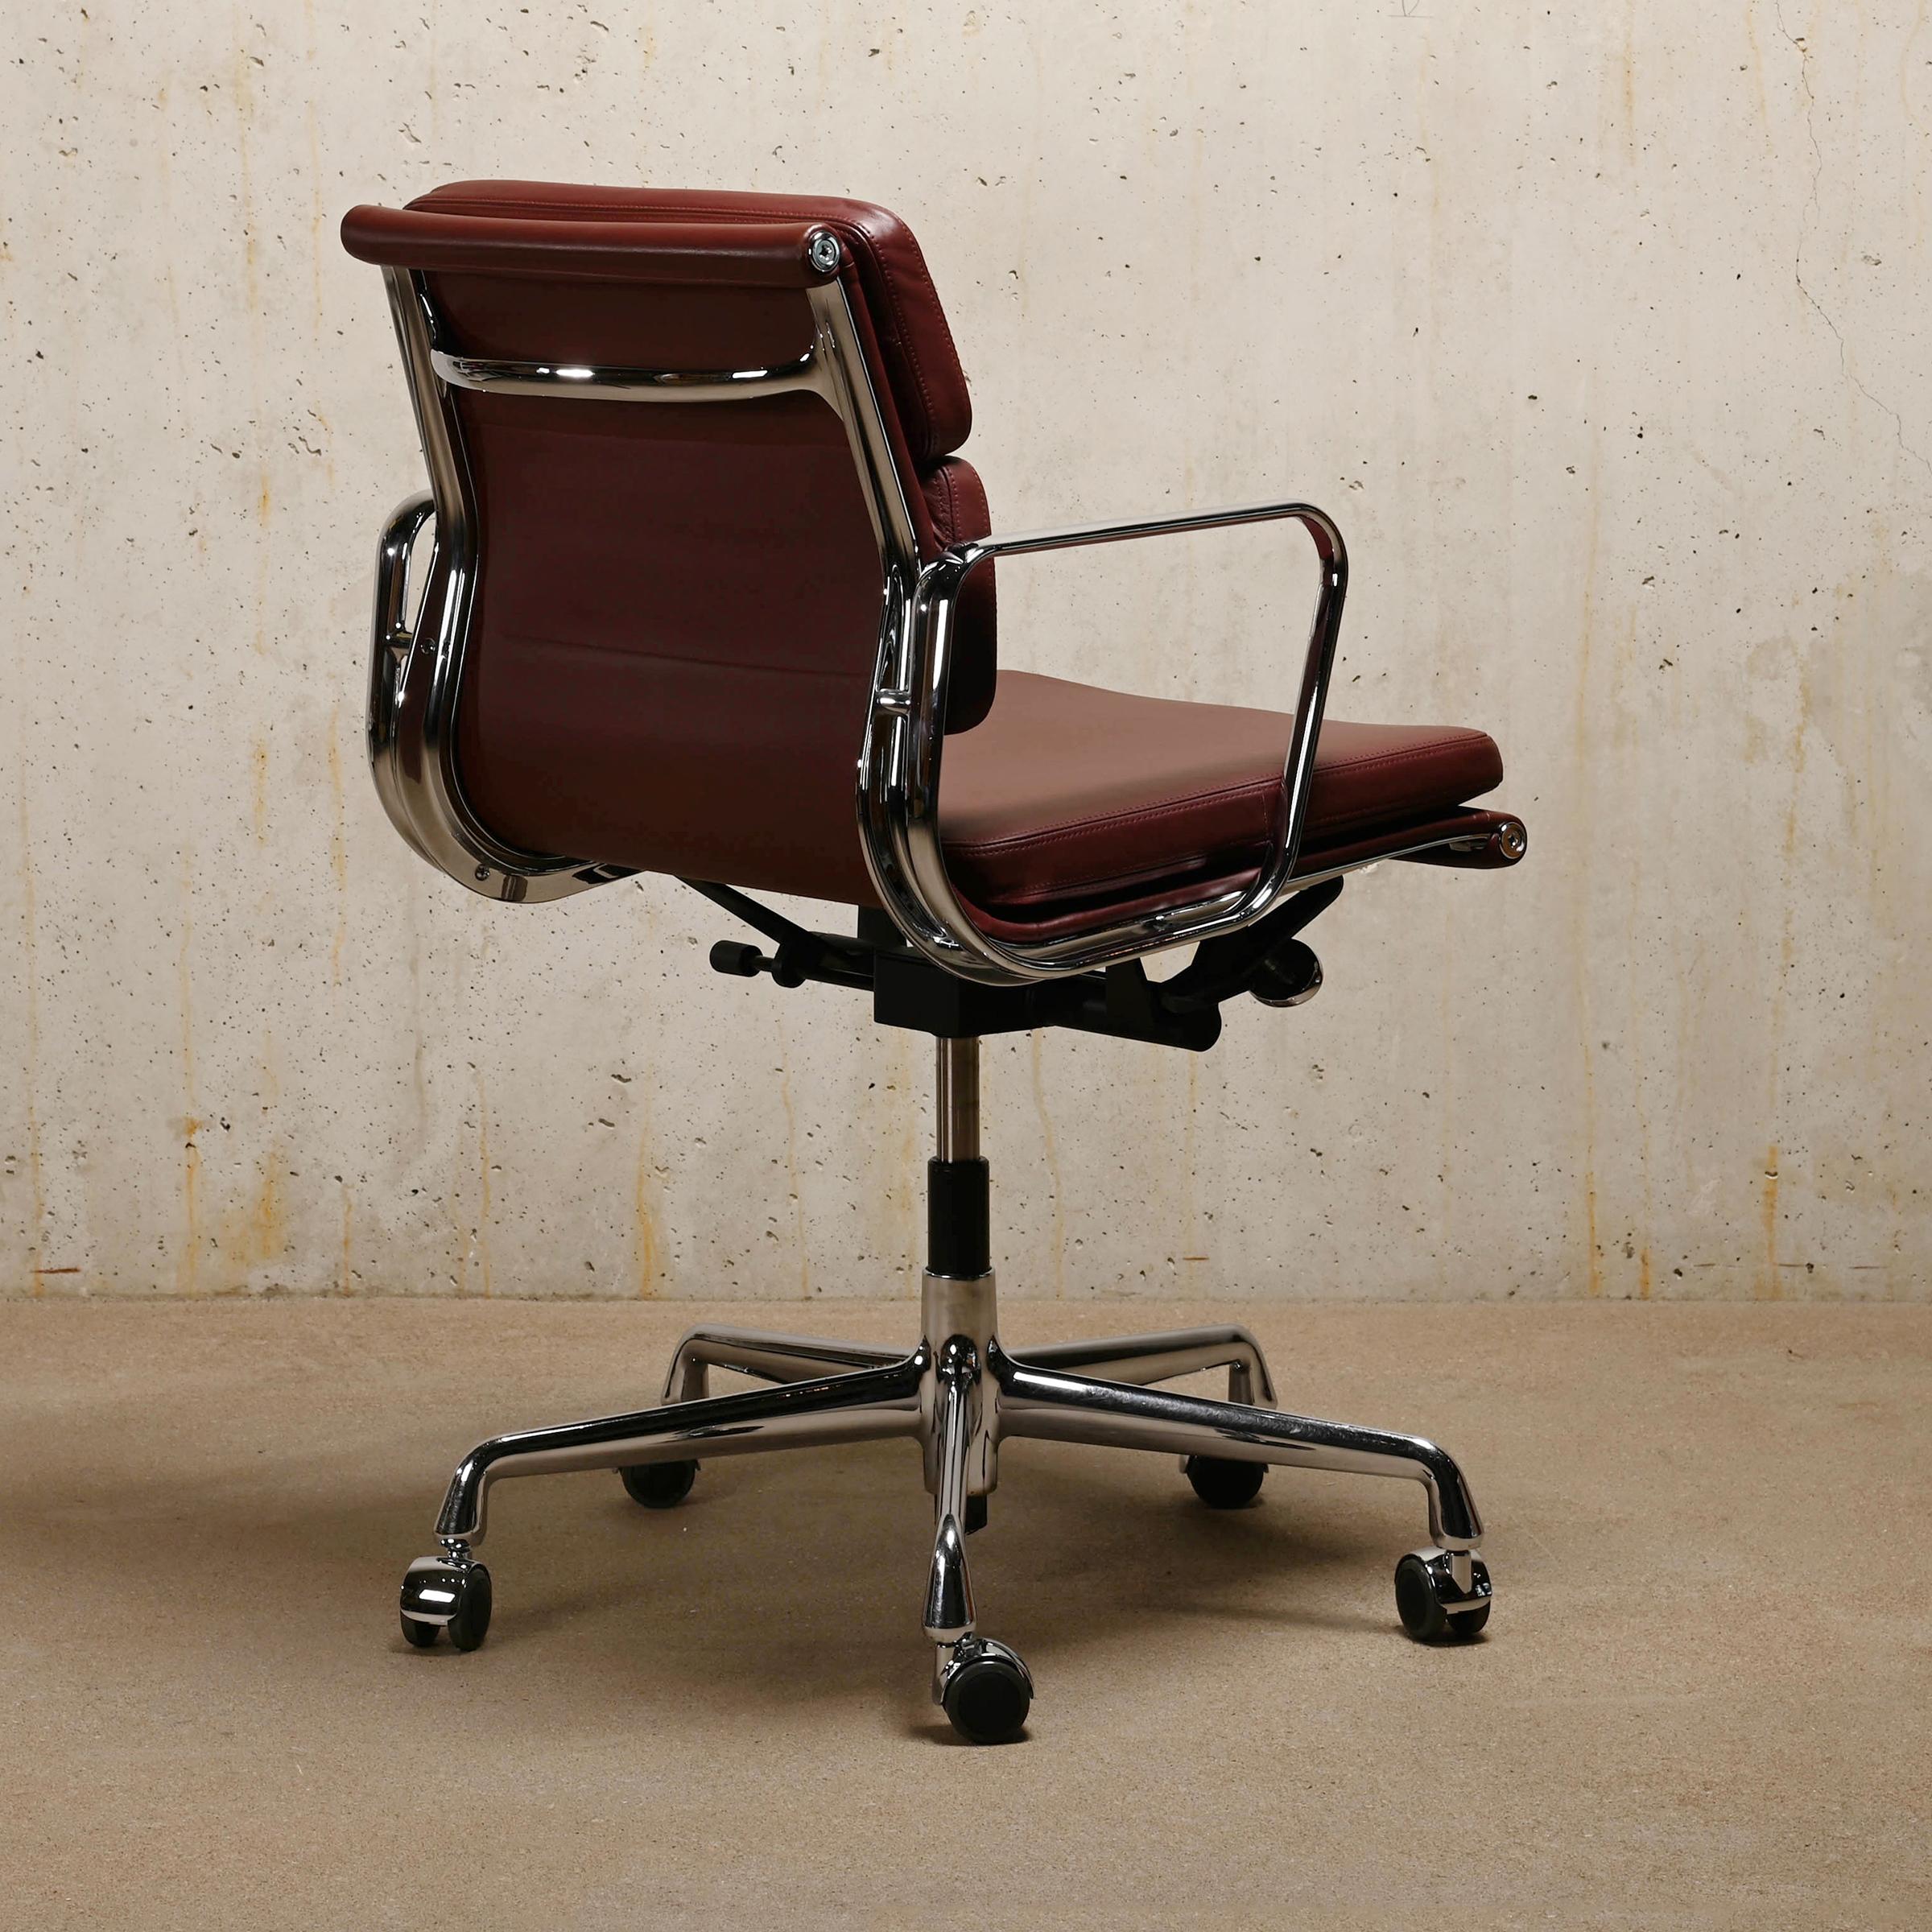 German Charles & Ray Eames EA217 Office Chair in Brandy Leather and Chrome, Vitra